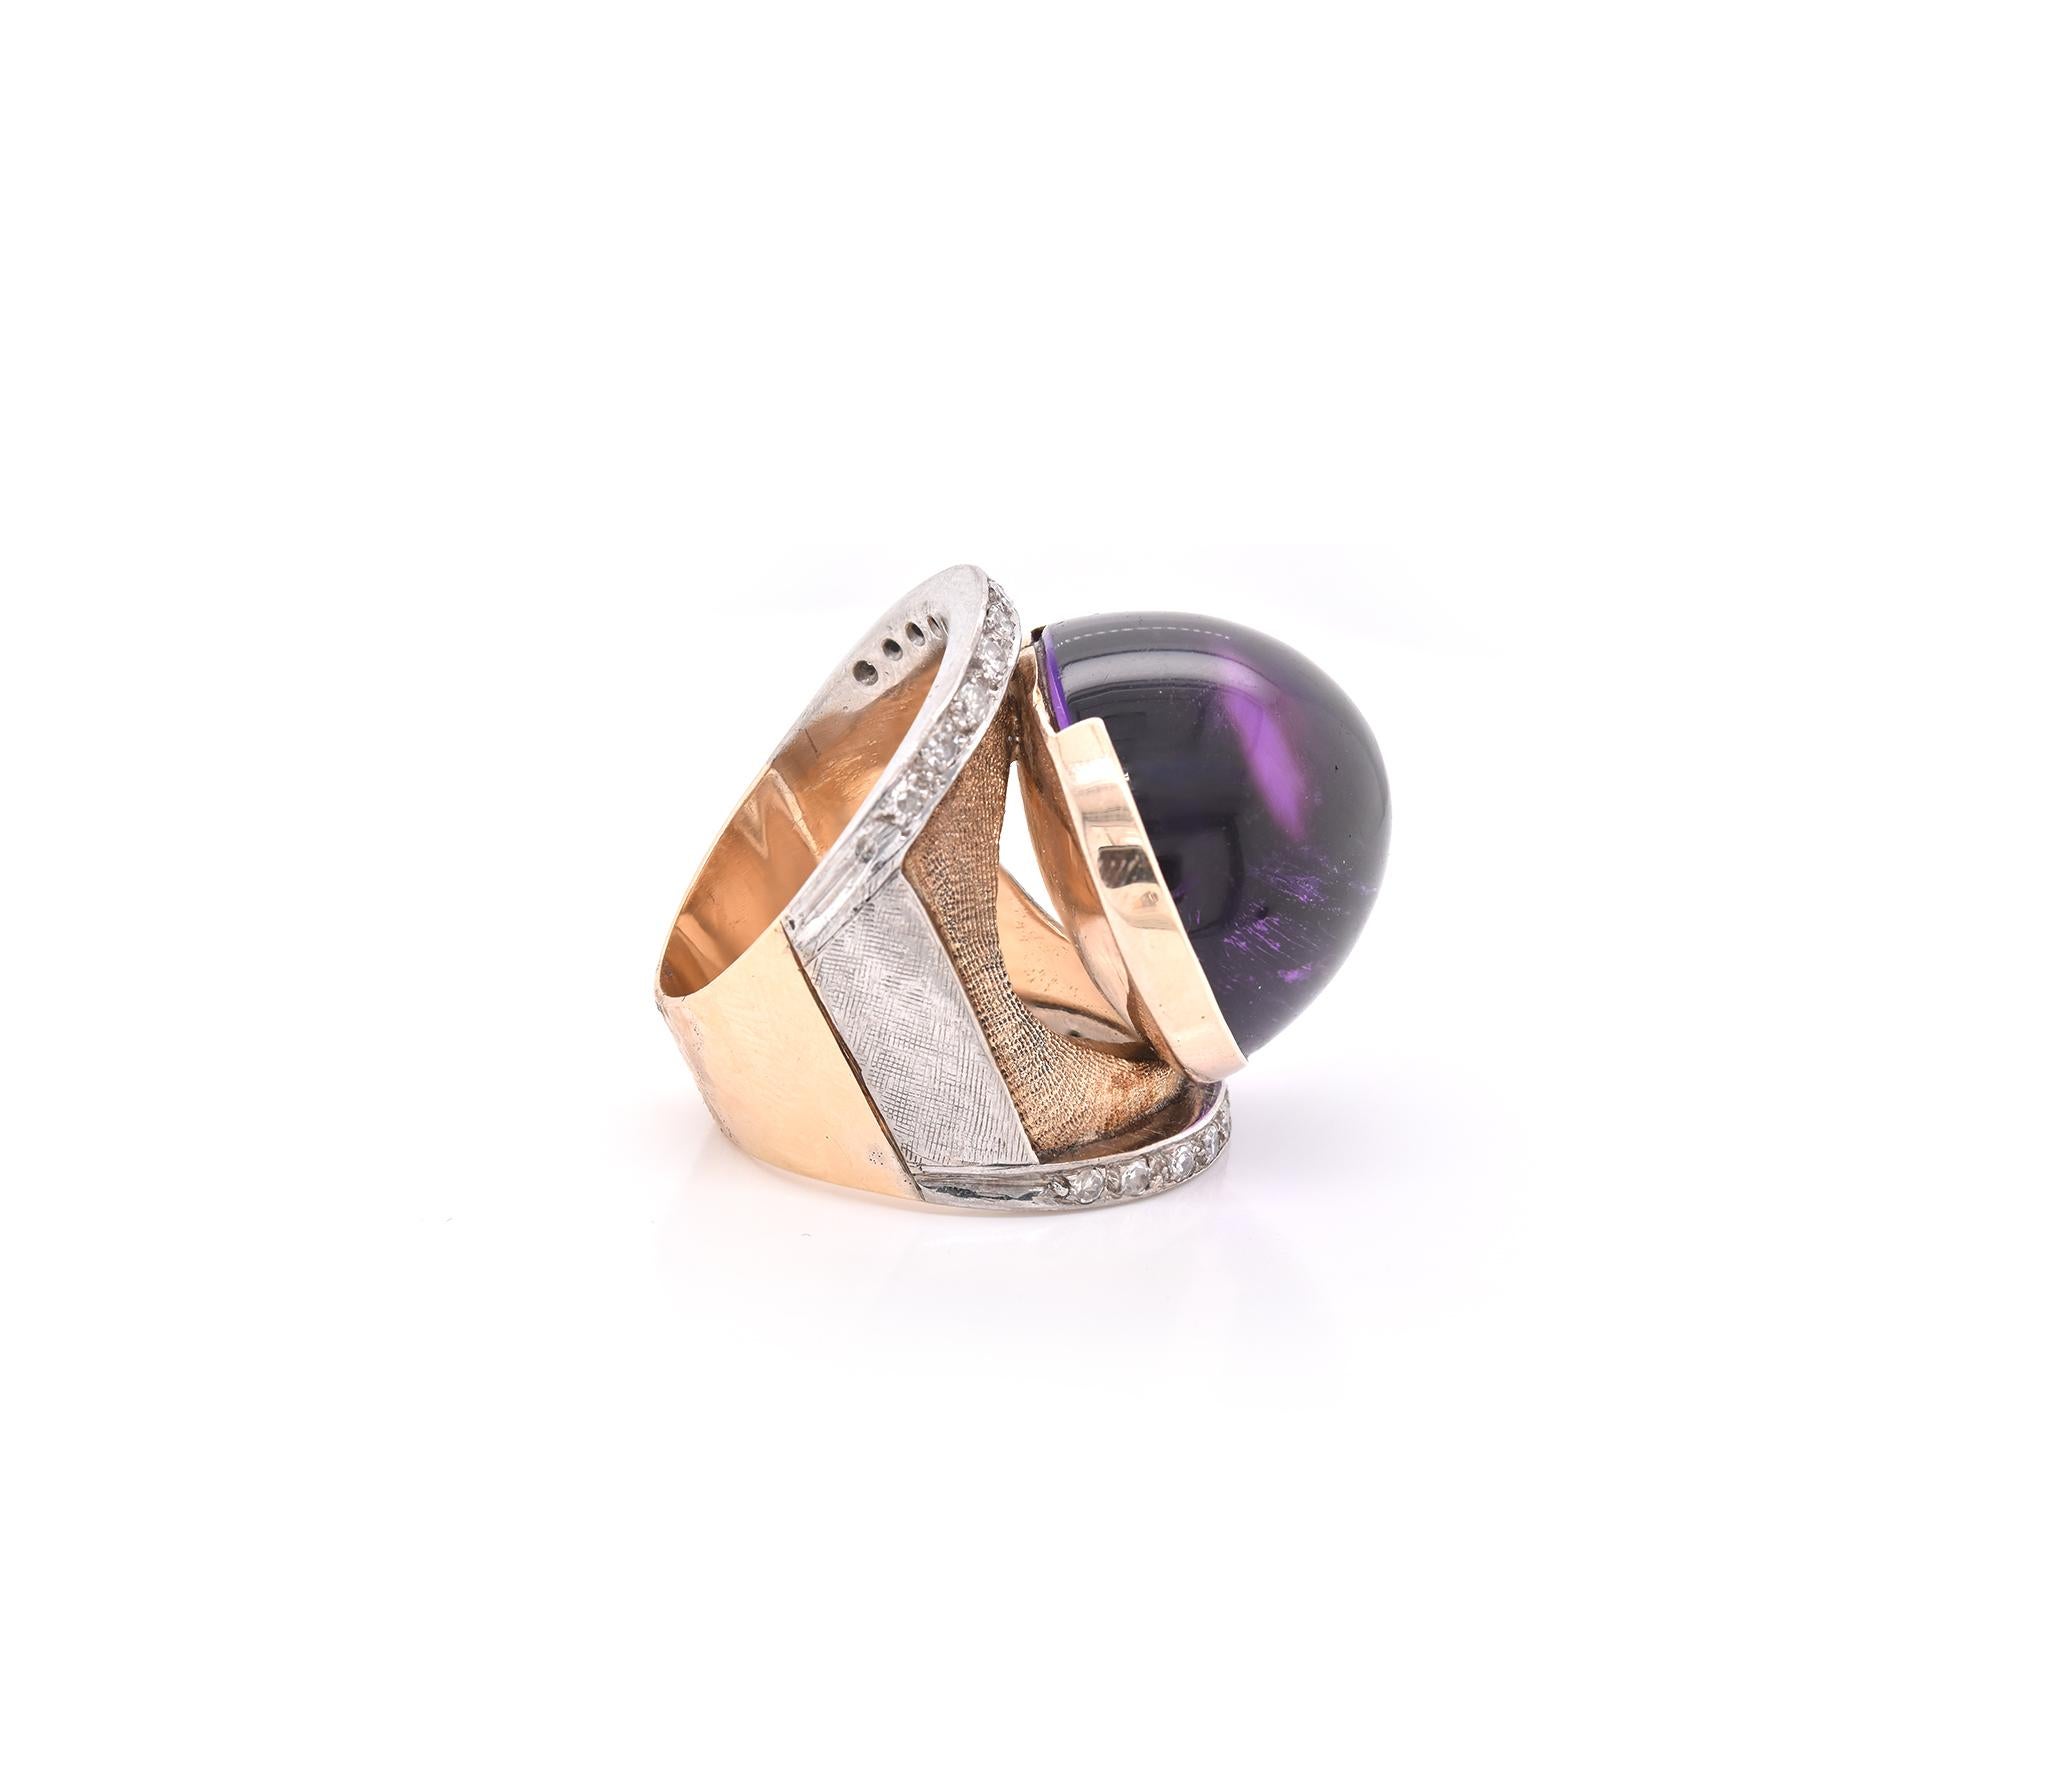 Material: 14k yellow and white gold
Gemstones: Cabochon amethyst = 20.00ct
Diamonds:  22 round brilliant cuts = 0.75cttw
Color: H
Clarity: SI1
Ring Size: 7.75 (please allow two additional shipping days for sizing requests)
Dimensions: ring top